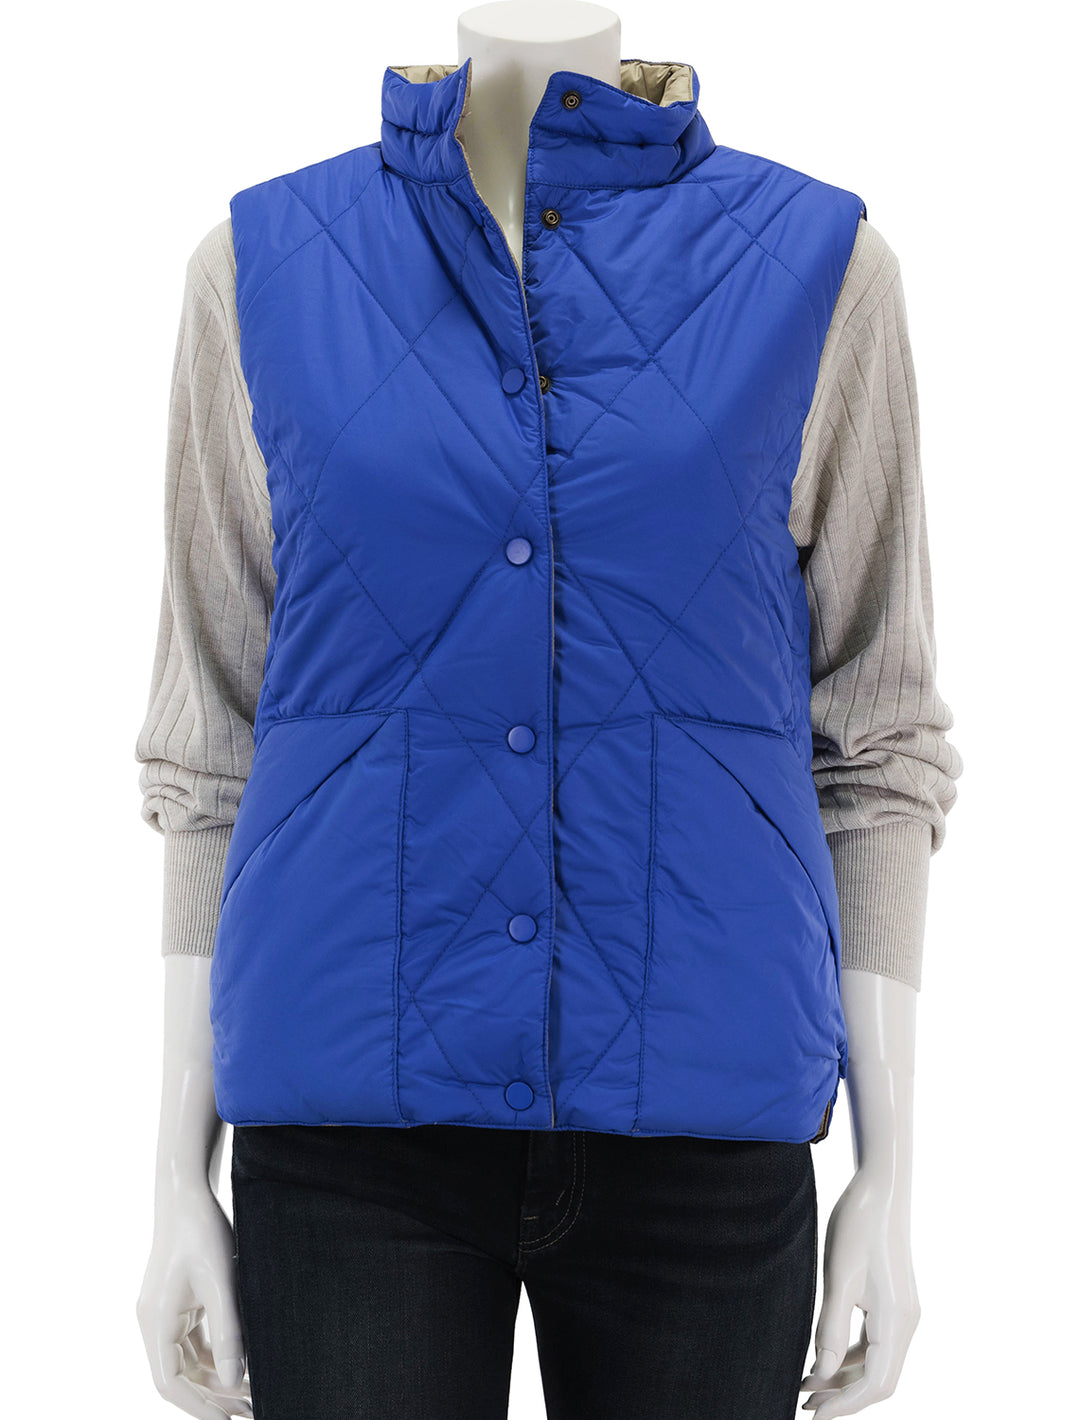 front vest snap Twigs in reversible – sapphire